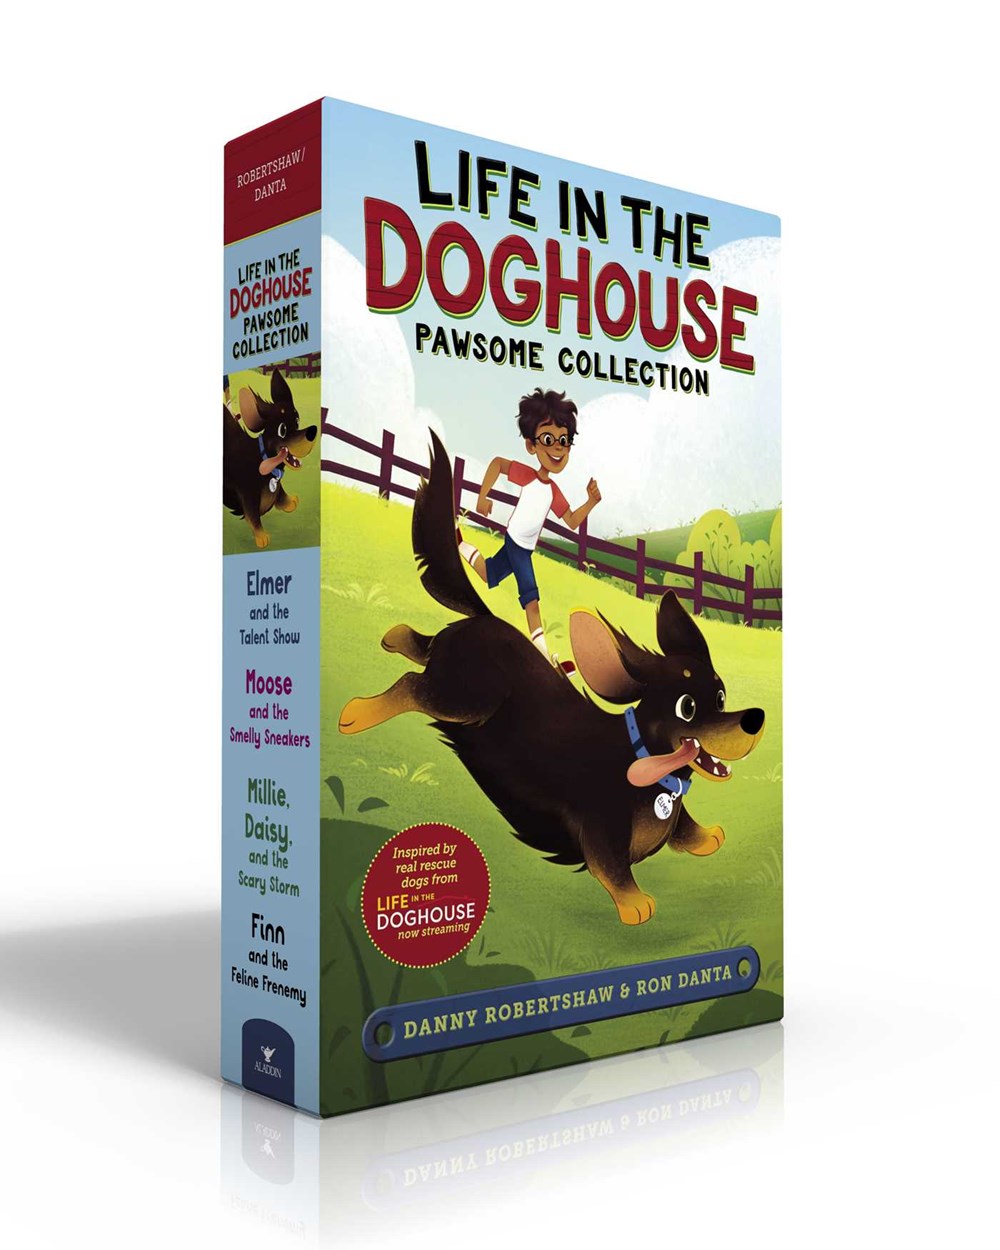 Giveaway: Life in the Doghouse Pawsome Collection Boxed Set (Danny Robertshaw and Ron Danta) ~ US Only!